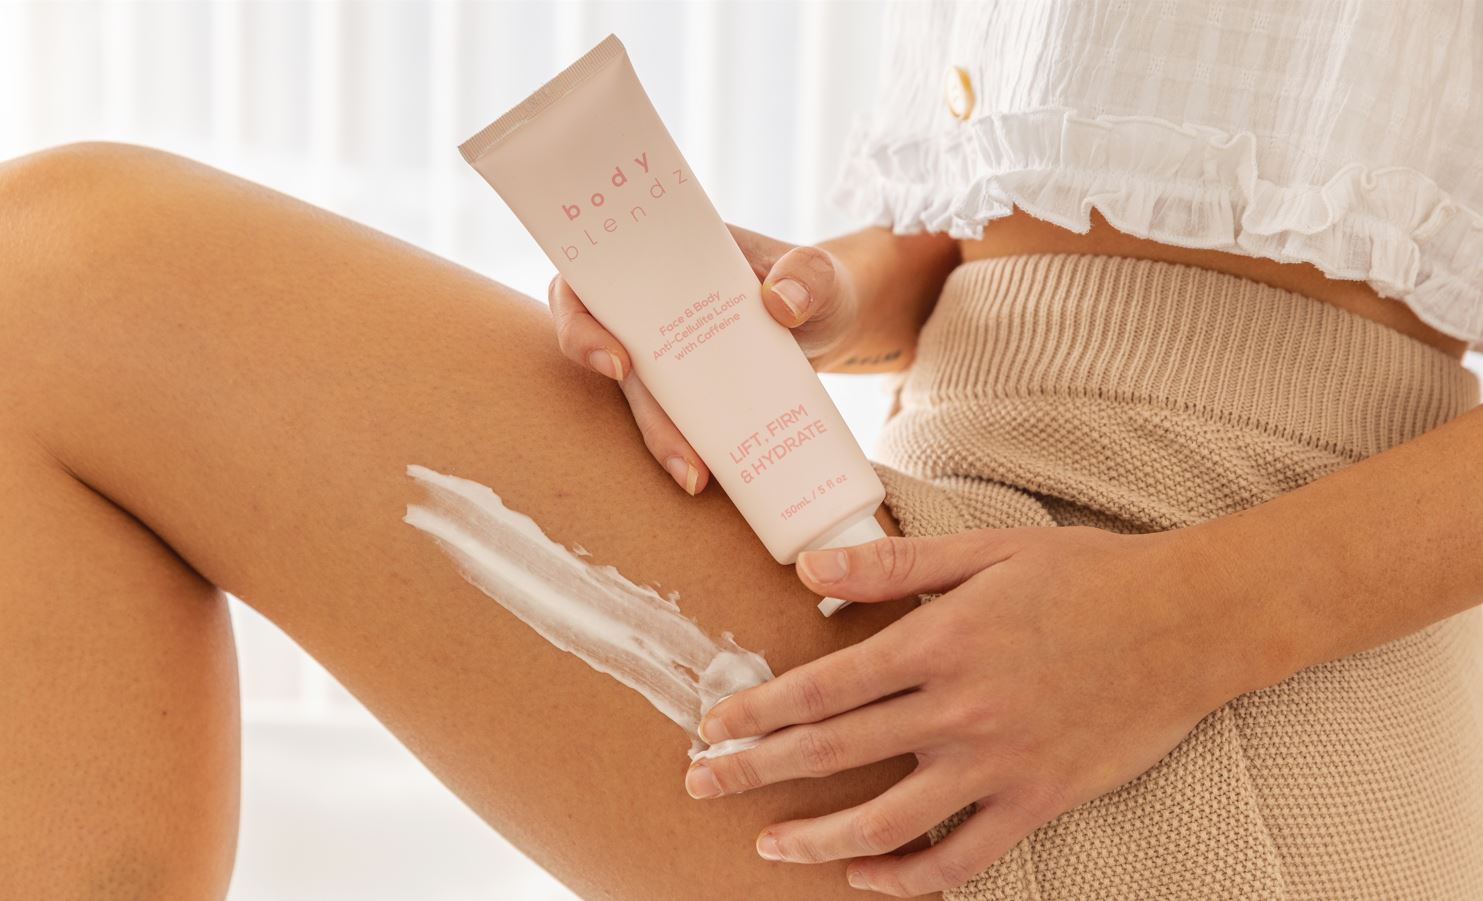 Shoppers ‘Can’t Believe’ How Fast This Cellulite Lotion Works on Tightening Skin—’Noticeable Difference in a Week’